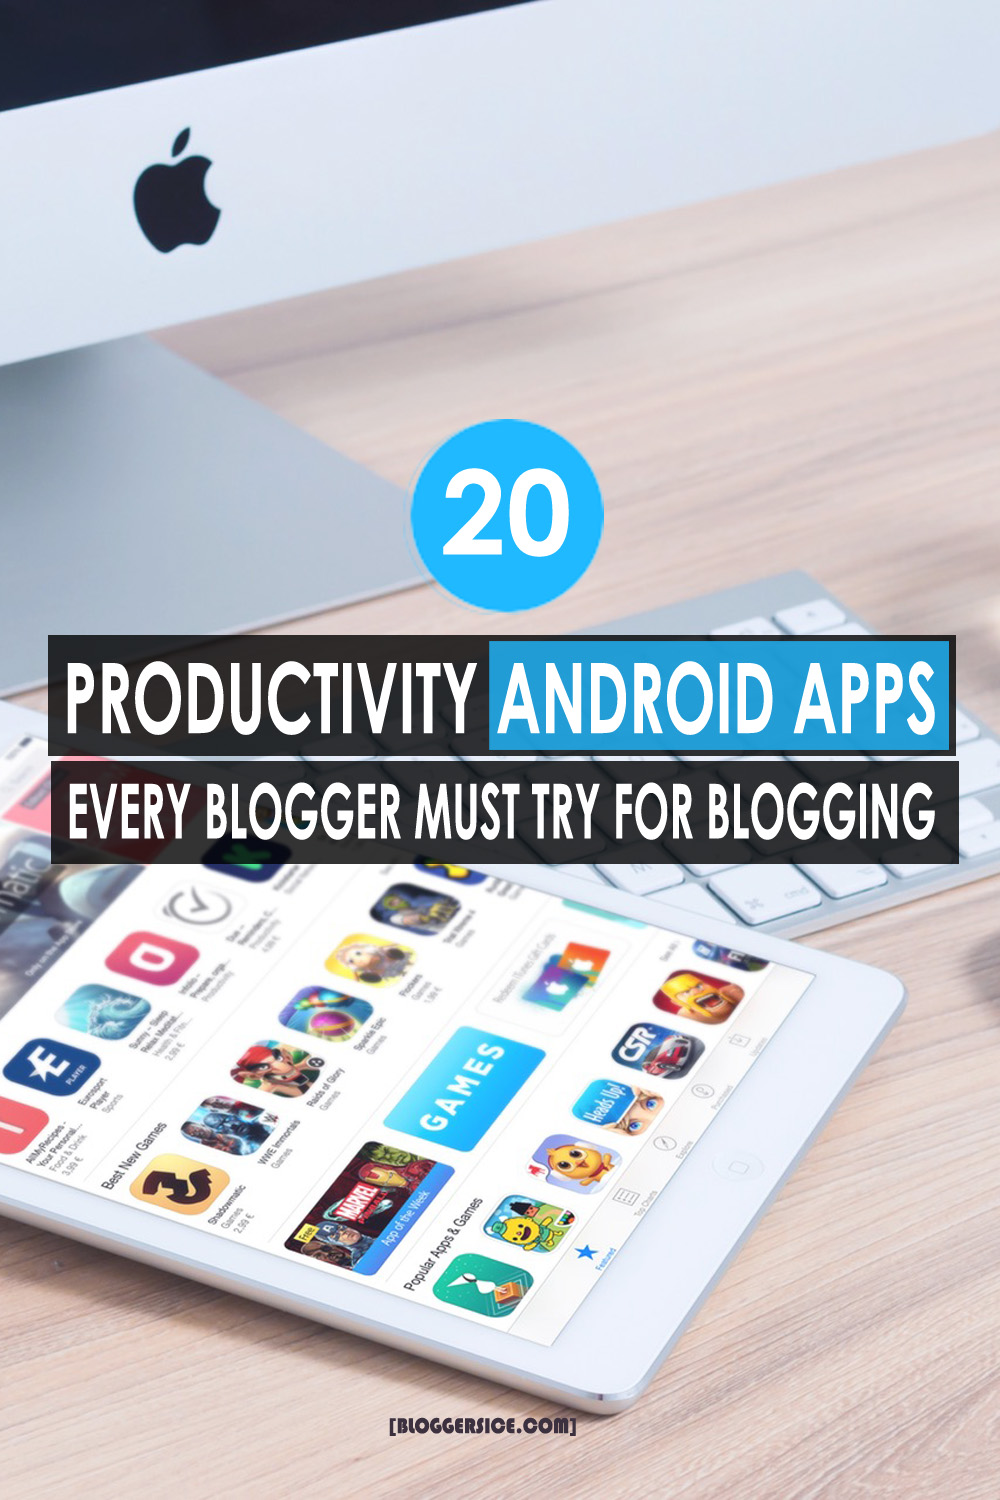 20 Productivity Android Apps Every Blogger Must Try While Blogging